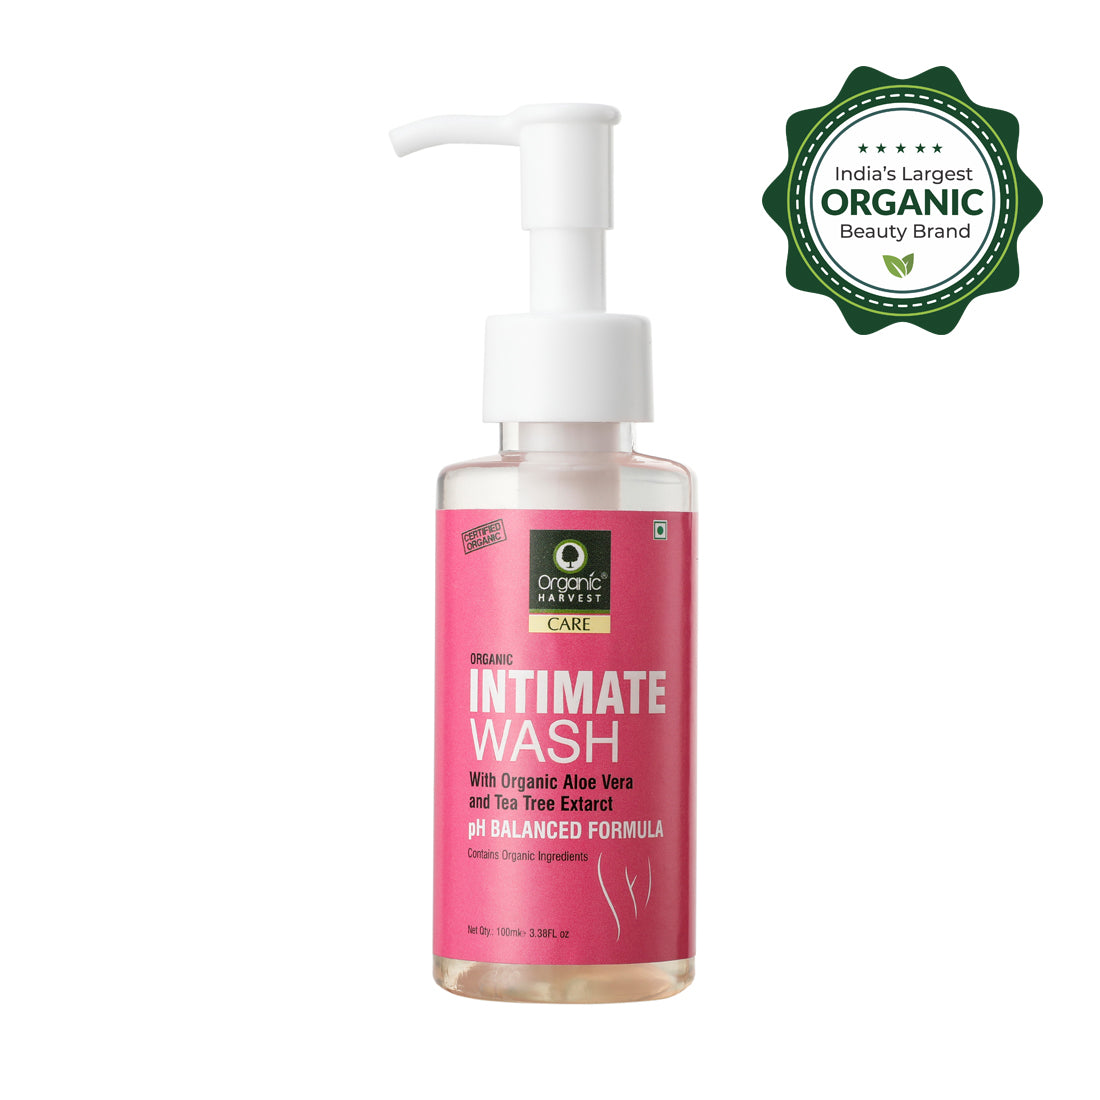 Daily Intimate Feminine Wash, Infused with the Goodness of Organic Aloe Vera and Tea Tree Extracts